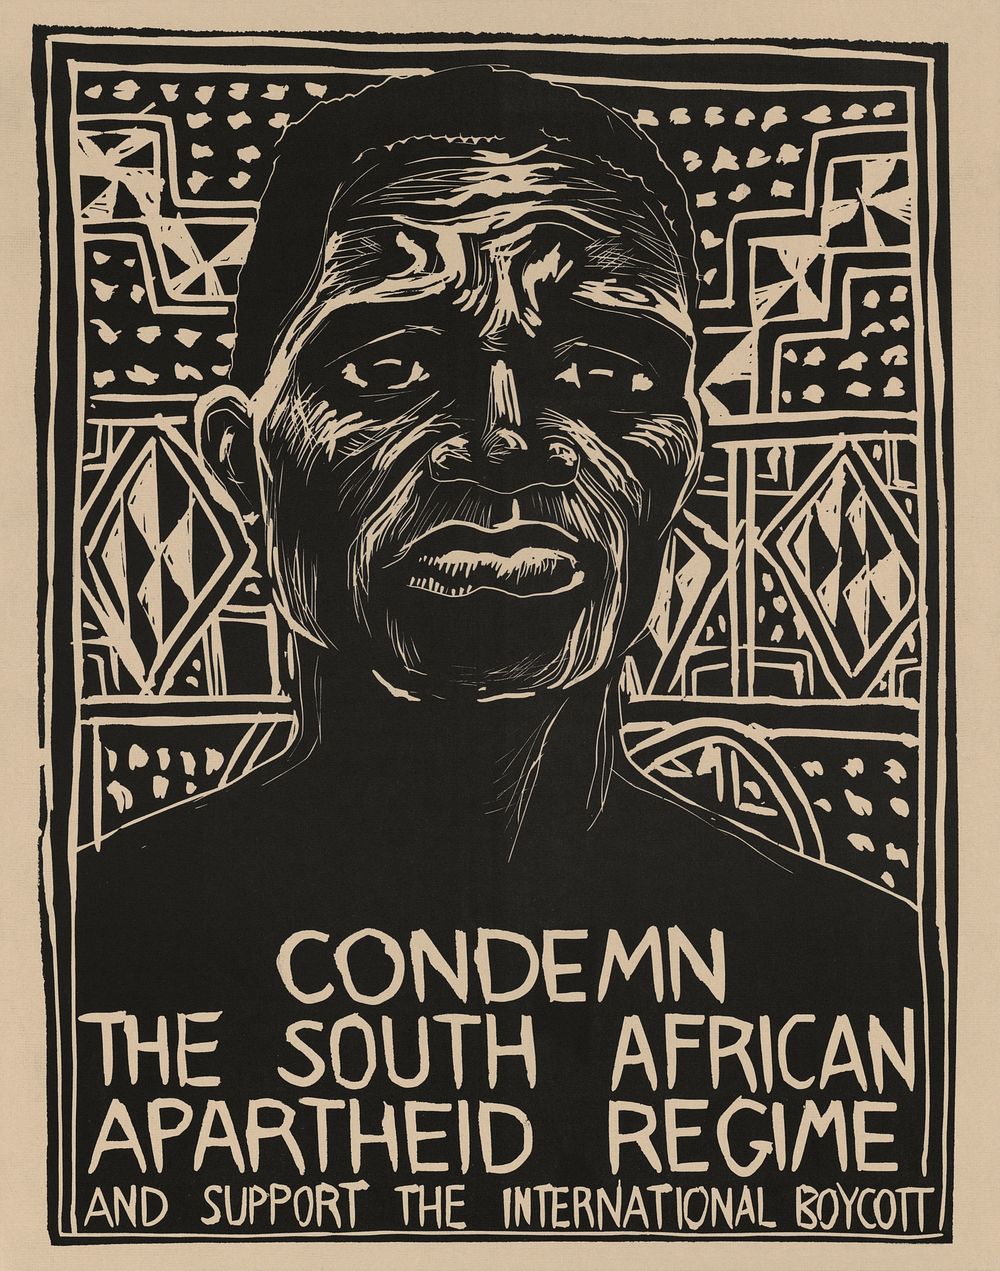 Condemn the South African apartheid regime and support the international boycott  (1976) vintage poster by Rachael Romero.…